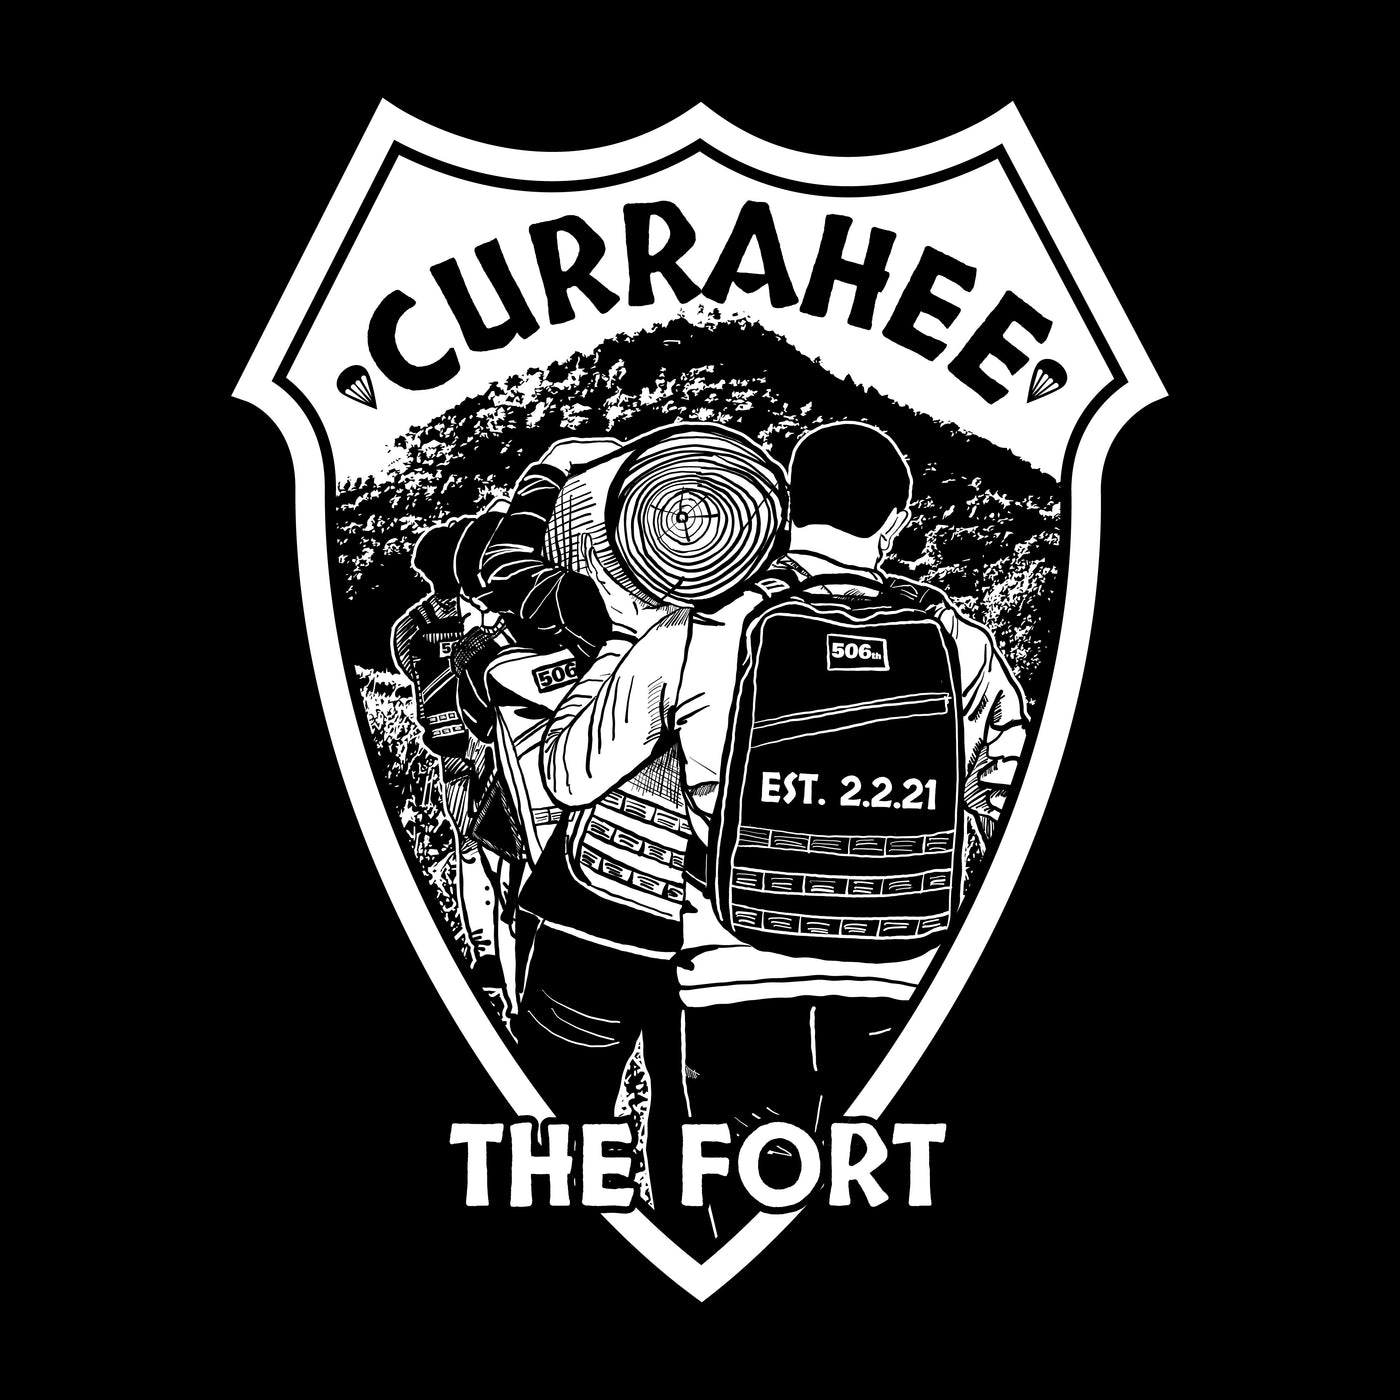 F3 The Fort Currahee Pre-Order January 2021